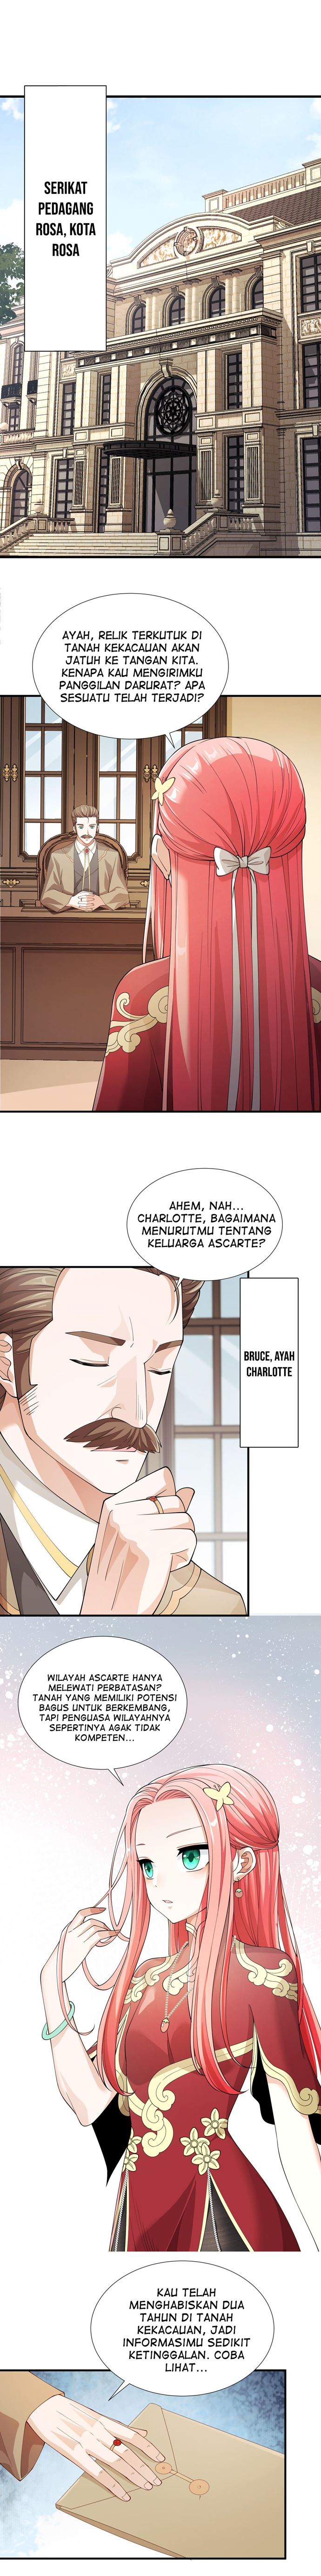 Dilarang COPAS - situs resmi www.mangacanblog.com - Komik little tyrant doesnt want to meet with a bad end 029 - chapter 29 30 Indonesia little tyrant doesnt want to meet with a bad end 029 - chapter 29 Terbaru 13|Baca Manga Komik Indonesia|Mangacan